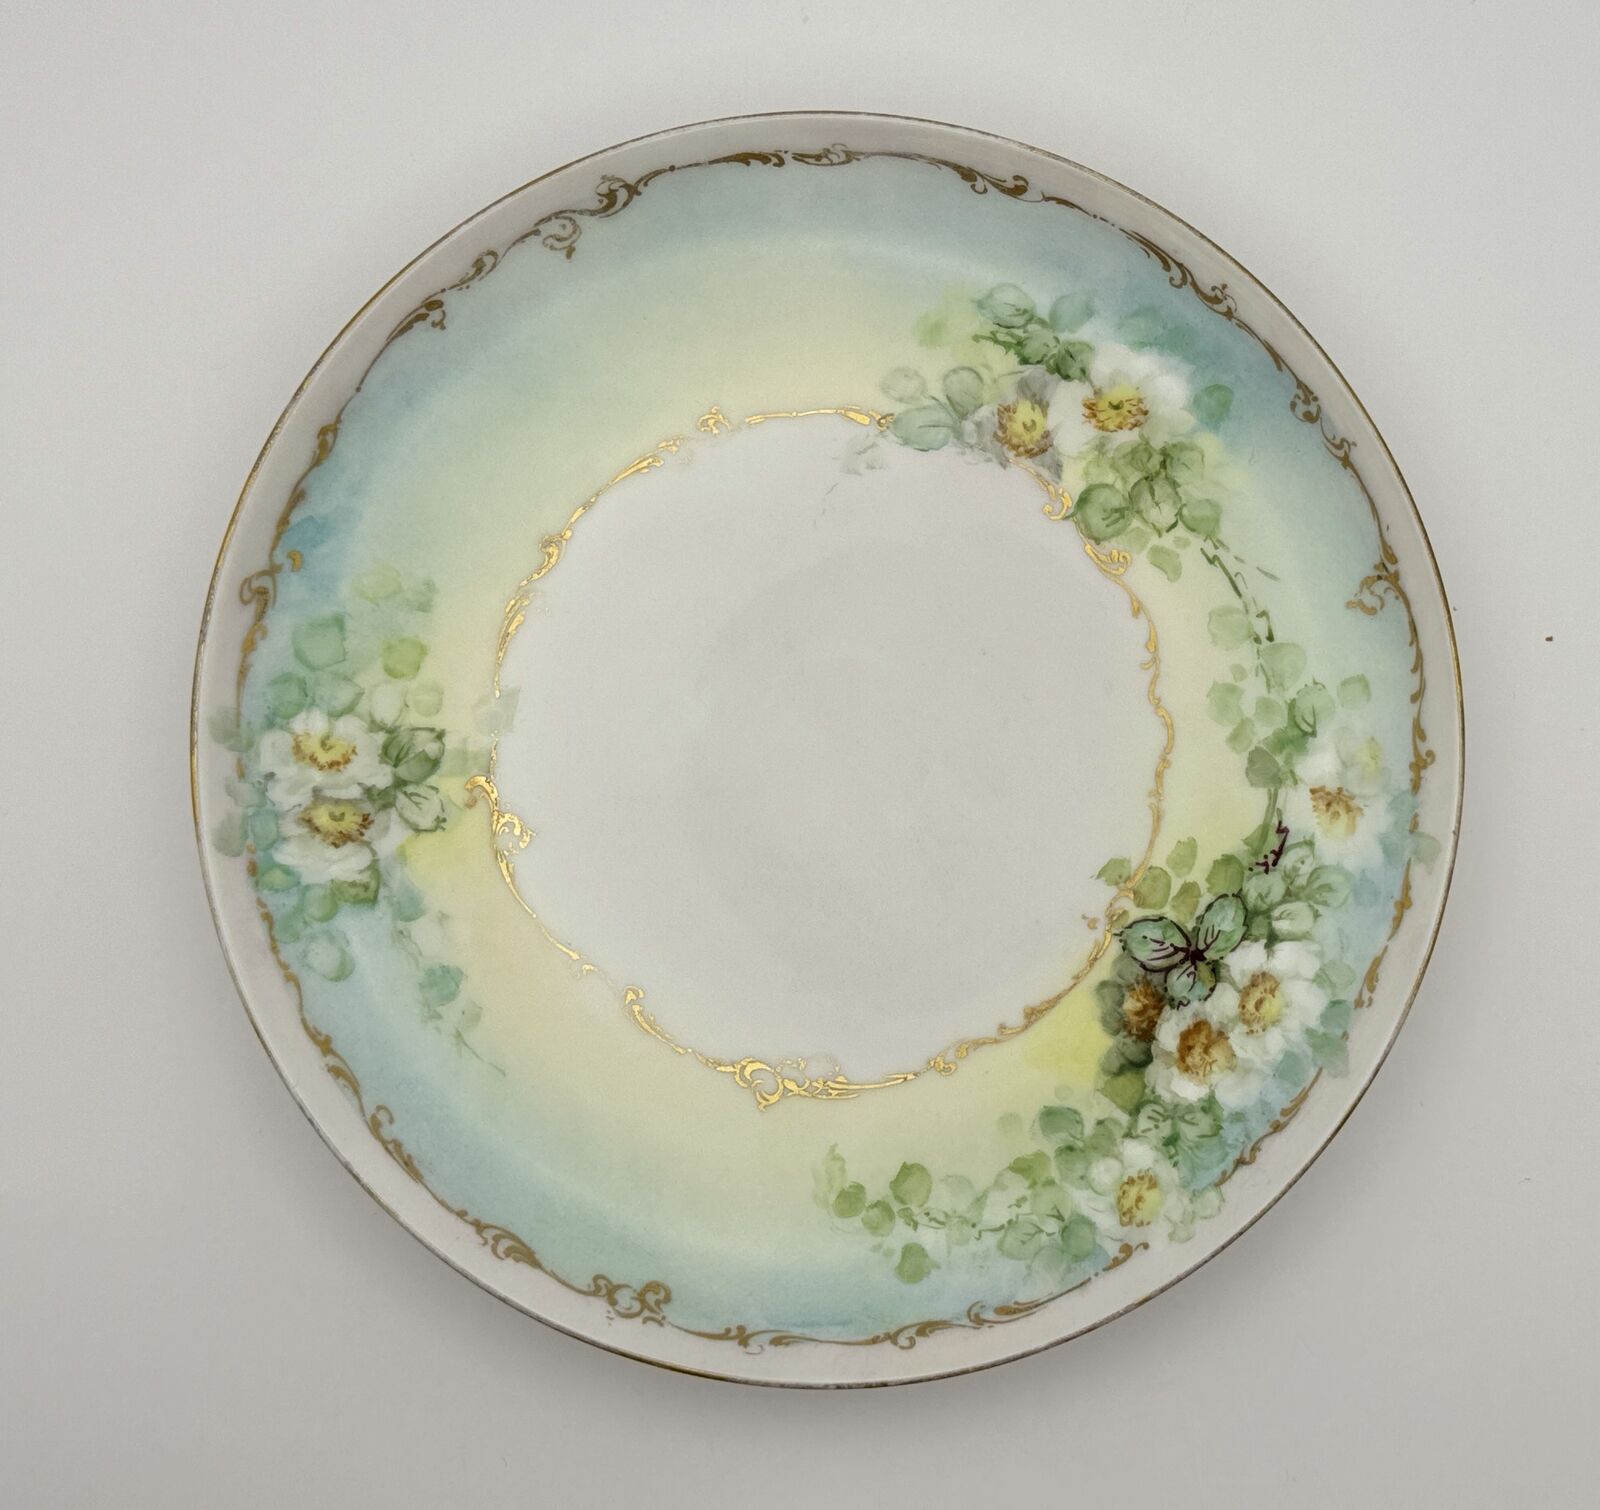 Beautiful Mavaleix, Mandavy & Balleroy Limoges Hand-Painted Floral Plate